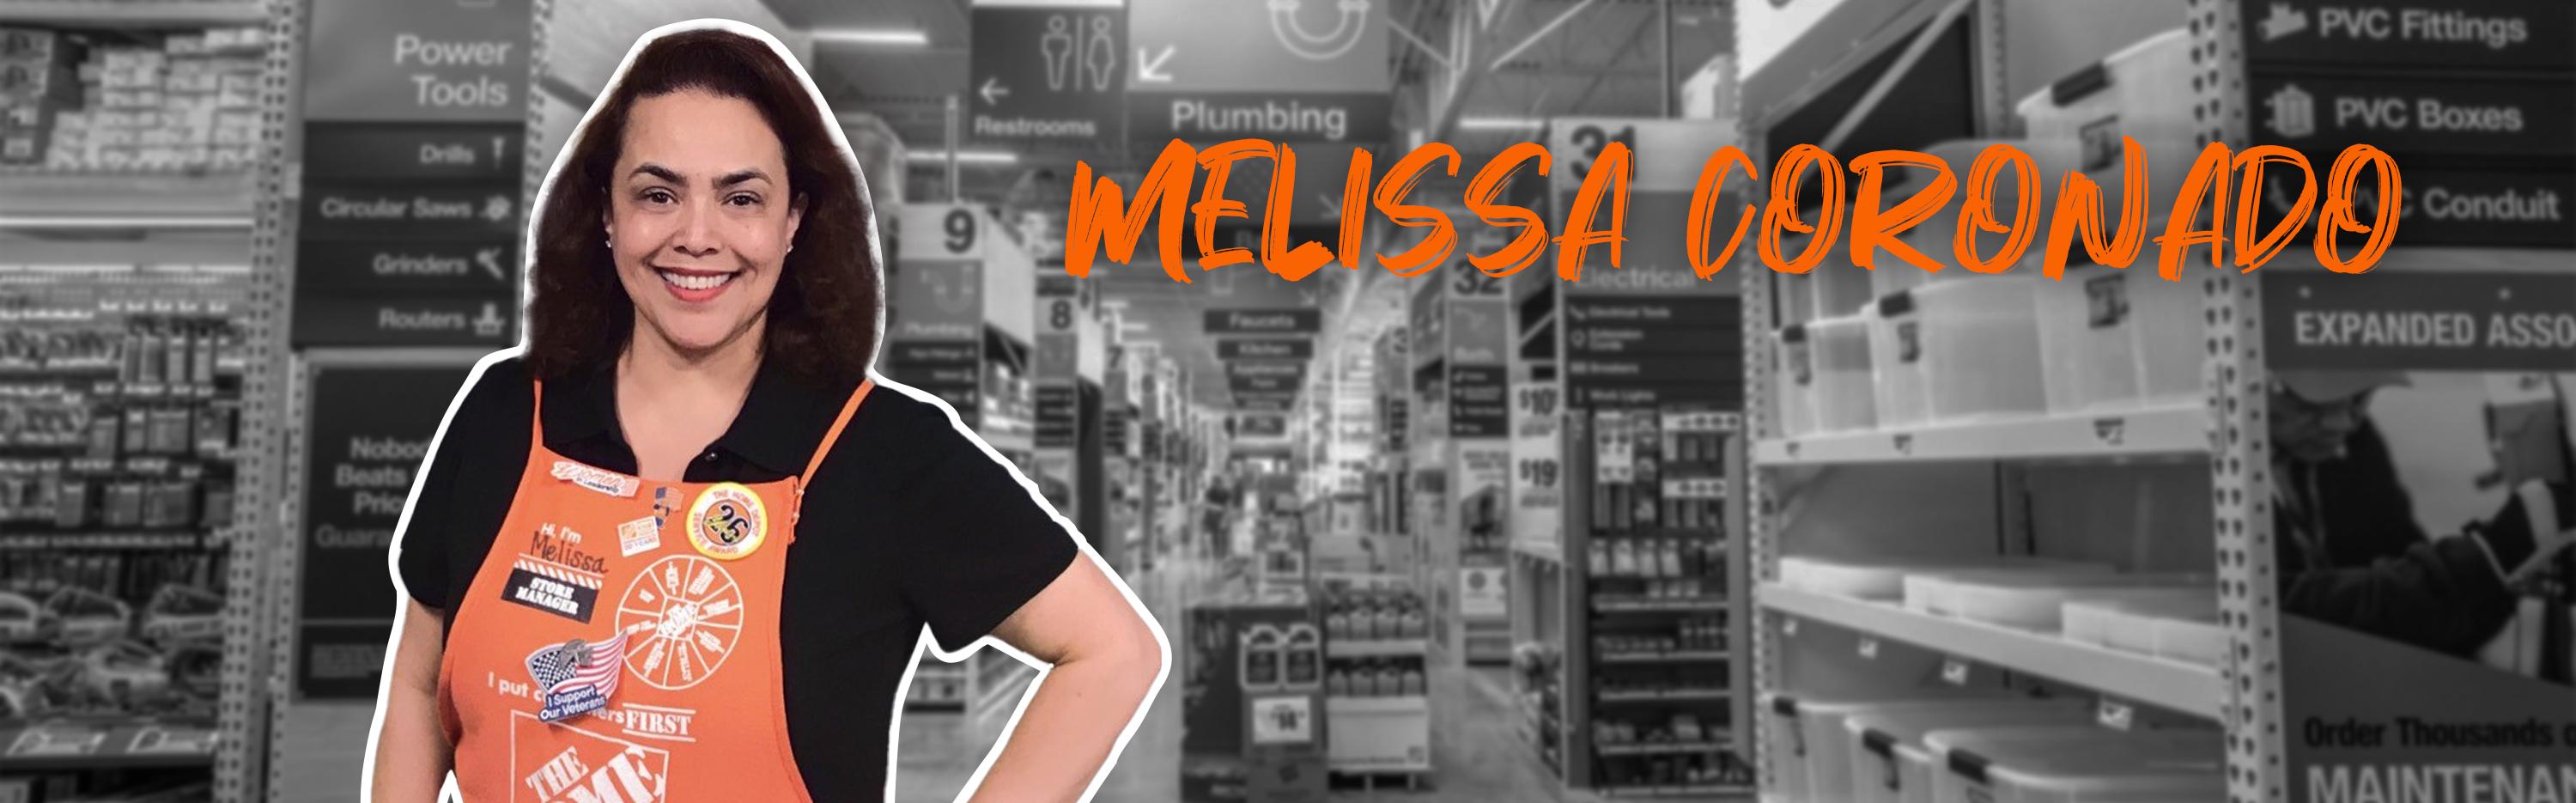 Melissa Coronado standing in front of an in-store aisle